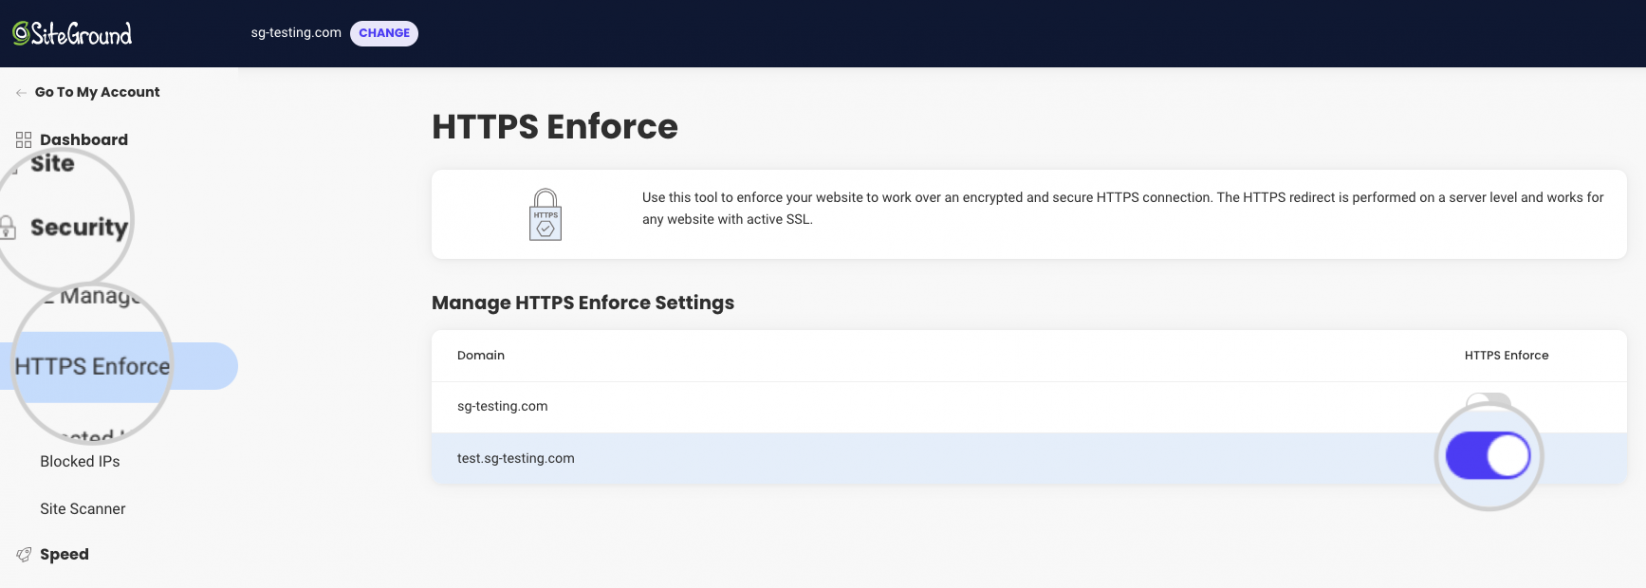 How do I enforce HTTPS for a subdomain